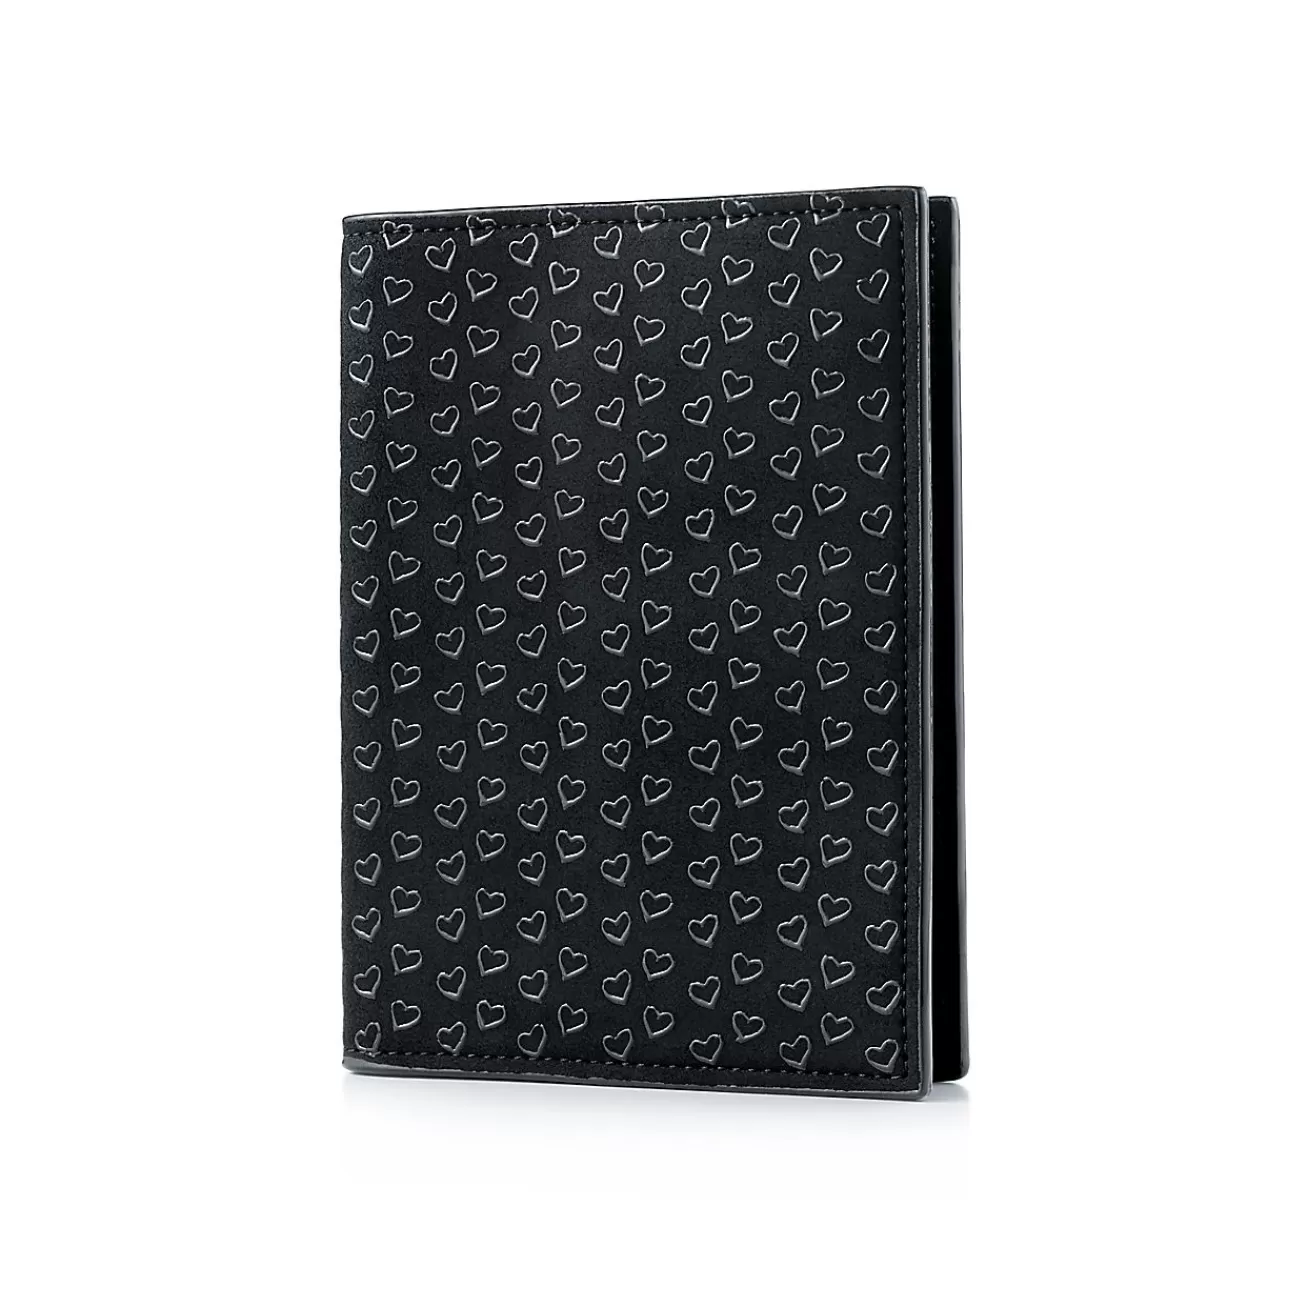 Tiffany & Co. Elsa Peretti® passport cover in black leather with lacquered Open Hearts. | ^Women Small Leather Goods | Women's Accessories